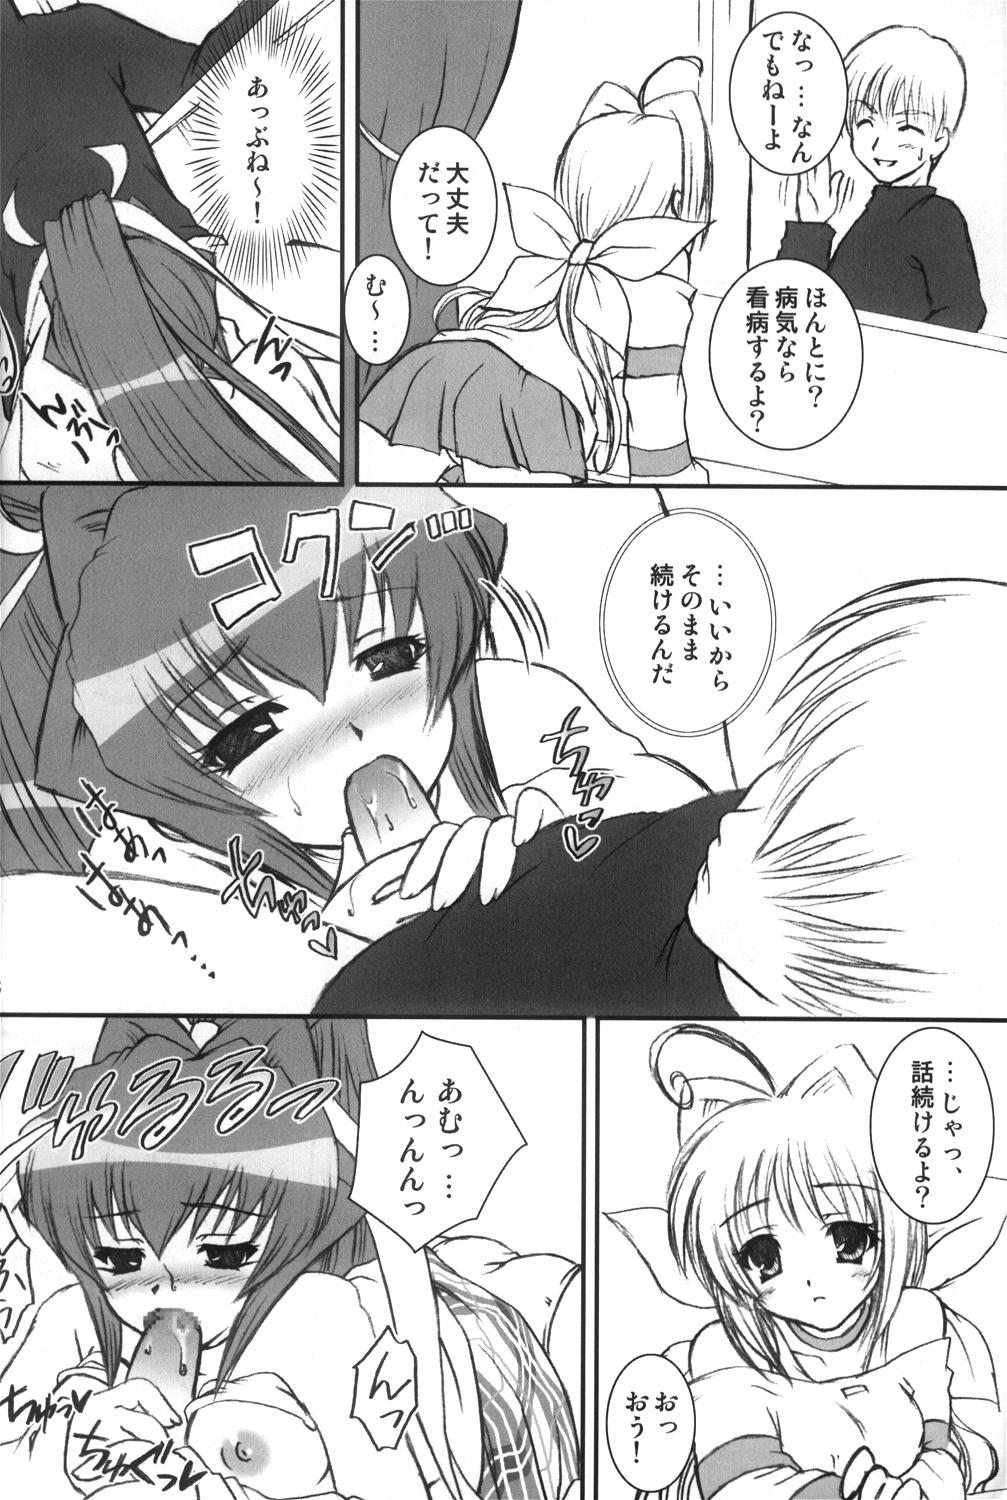 Argentino I have fallen in love with you... - Muv-luv Freak - Page 7